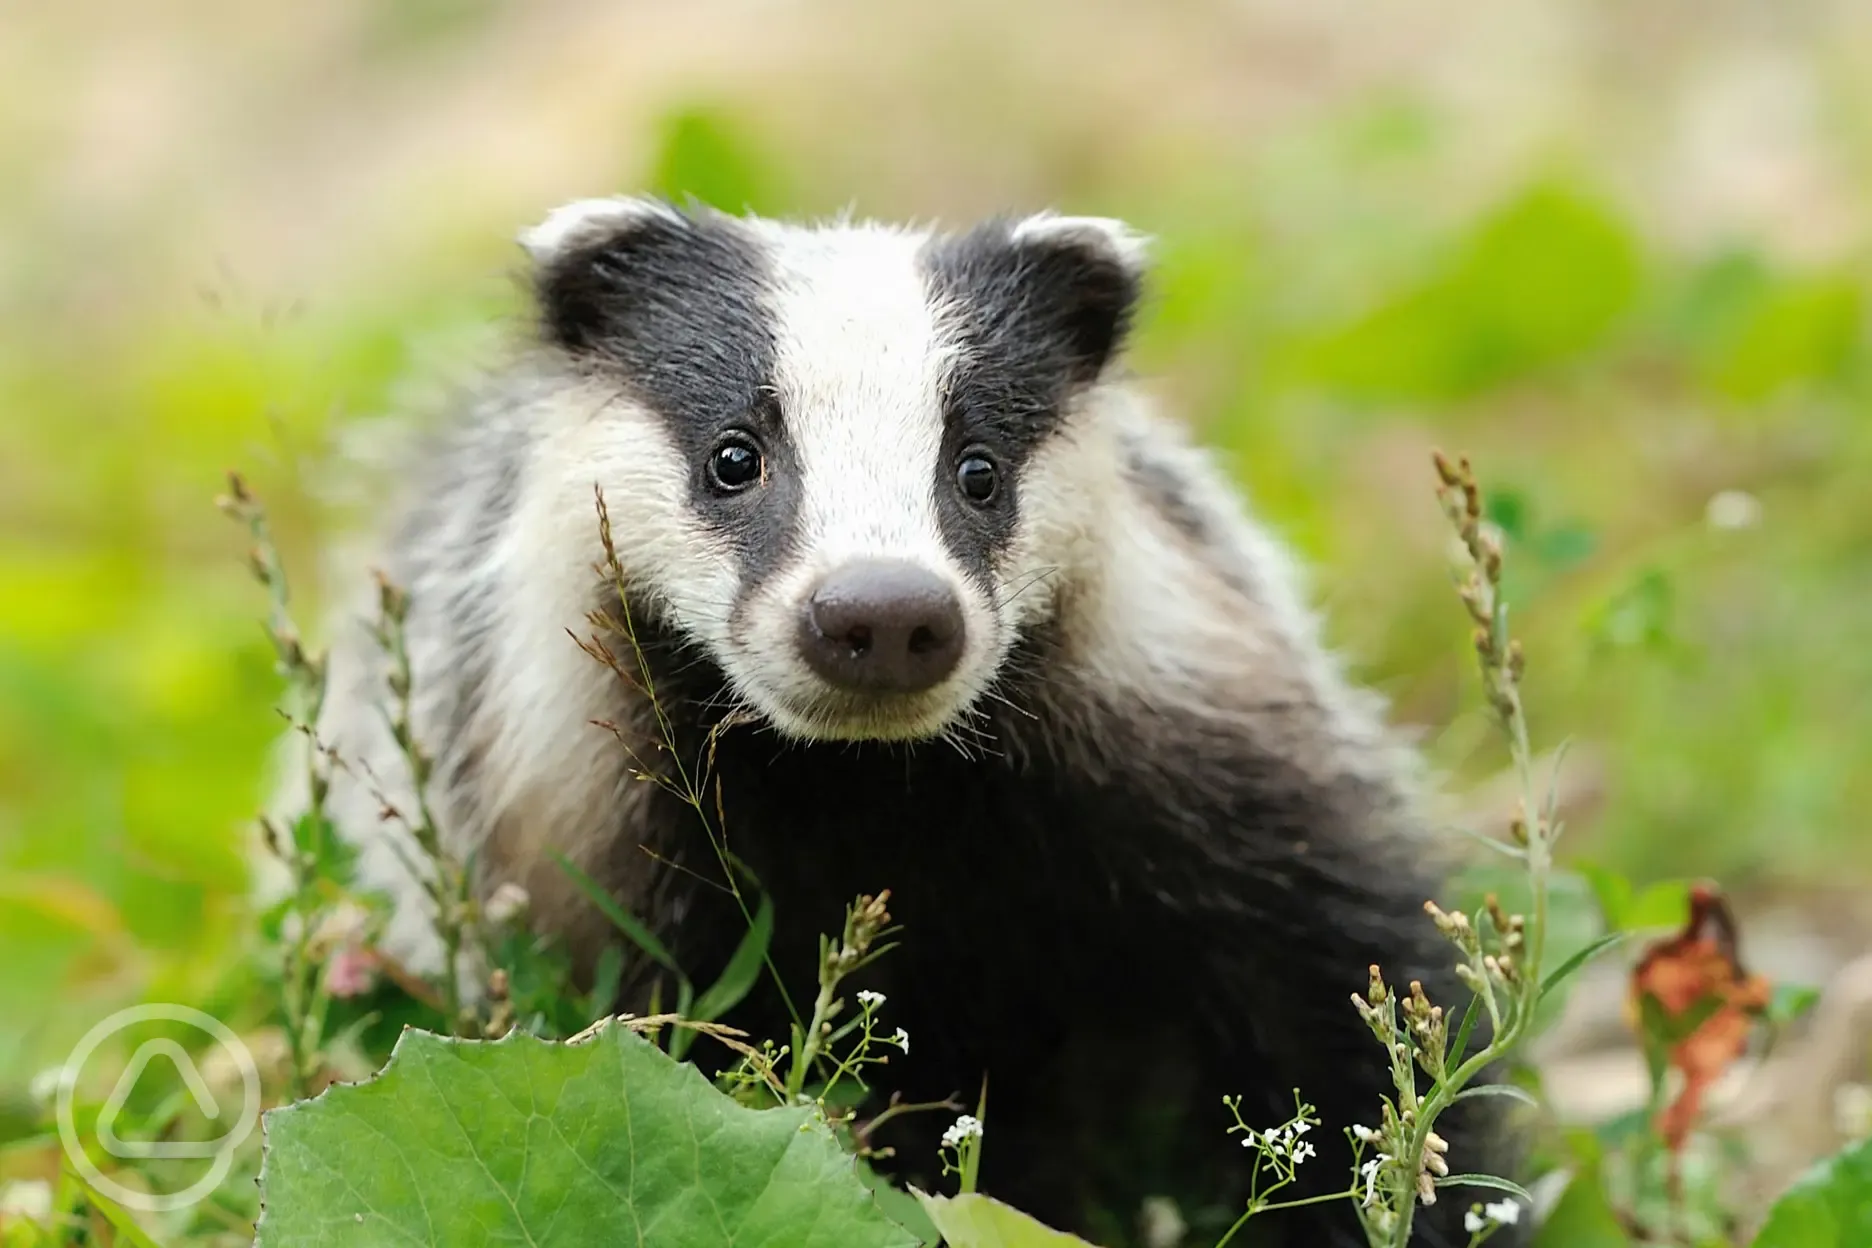 Badgers to be seen